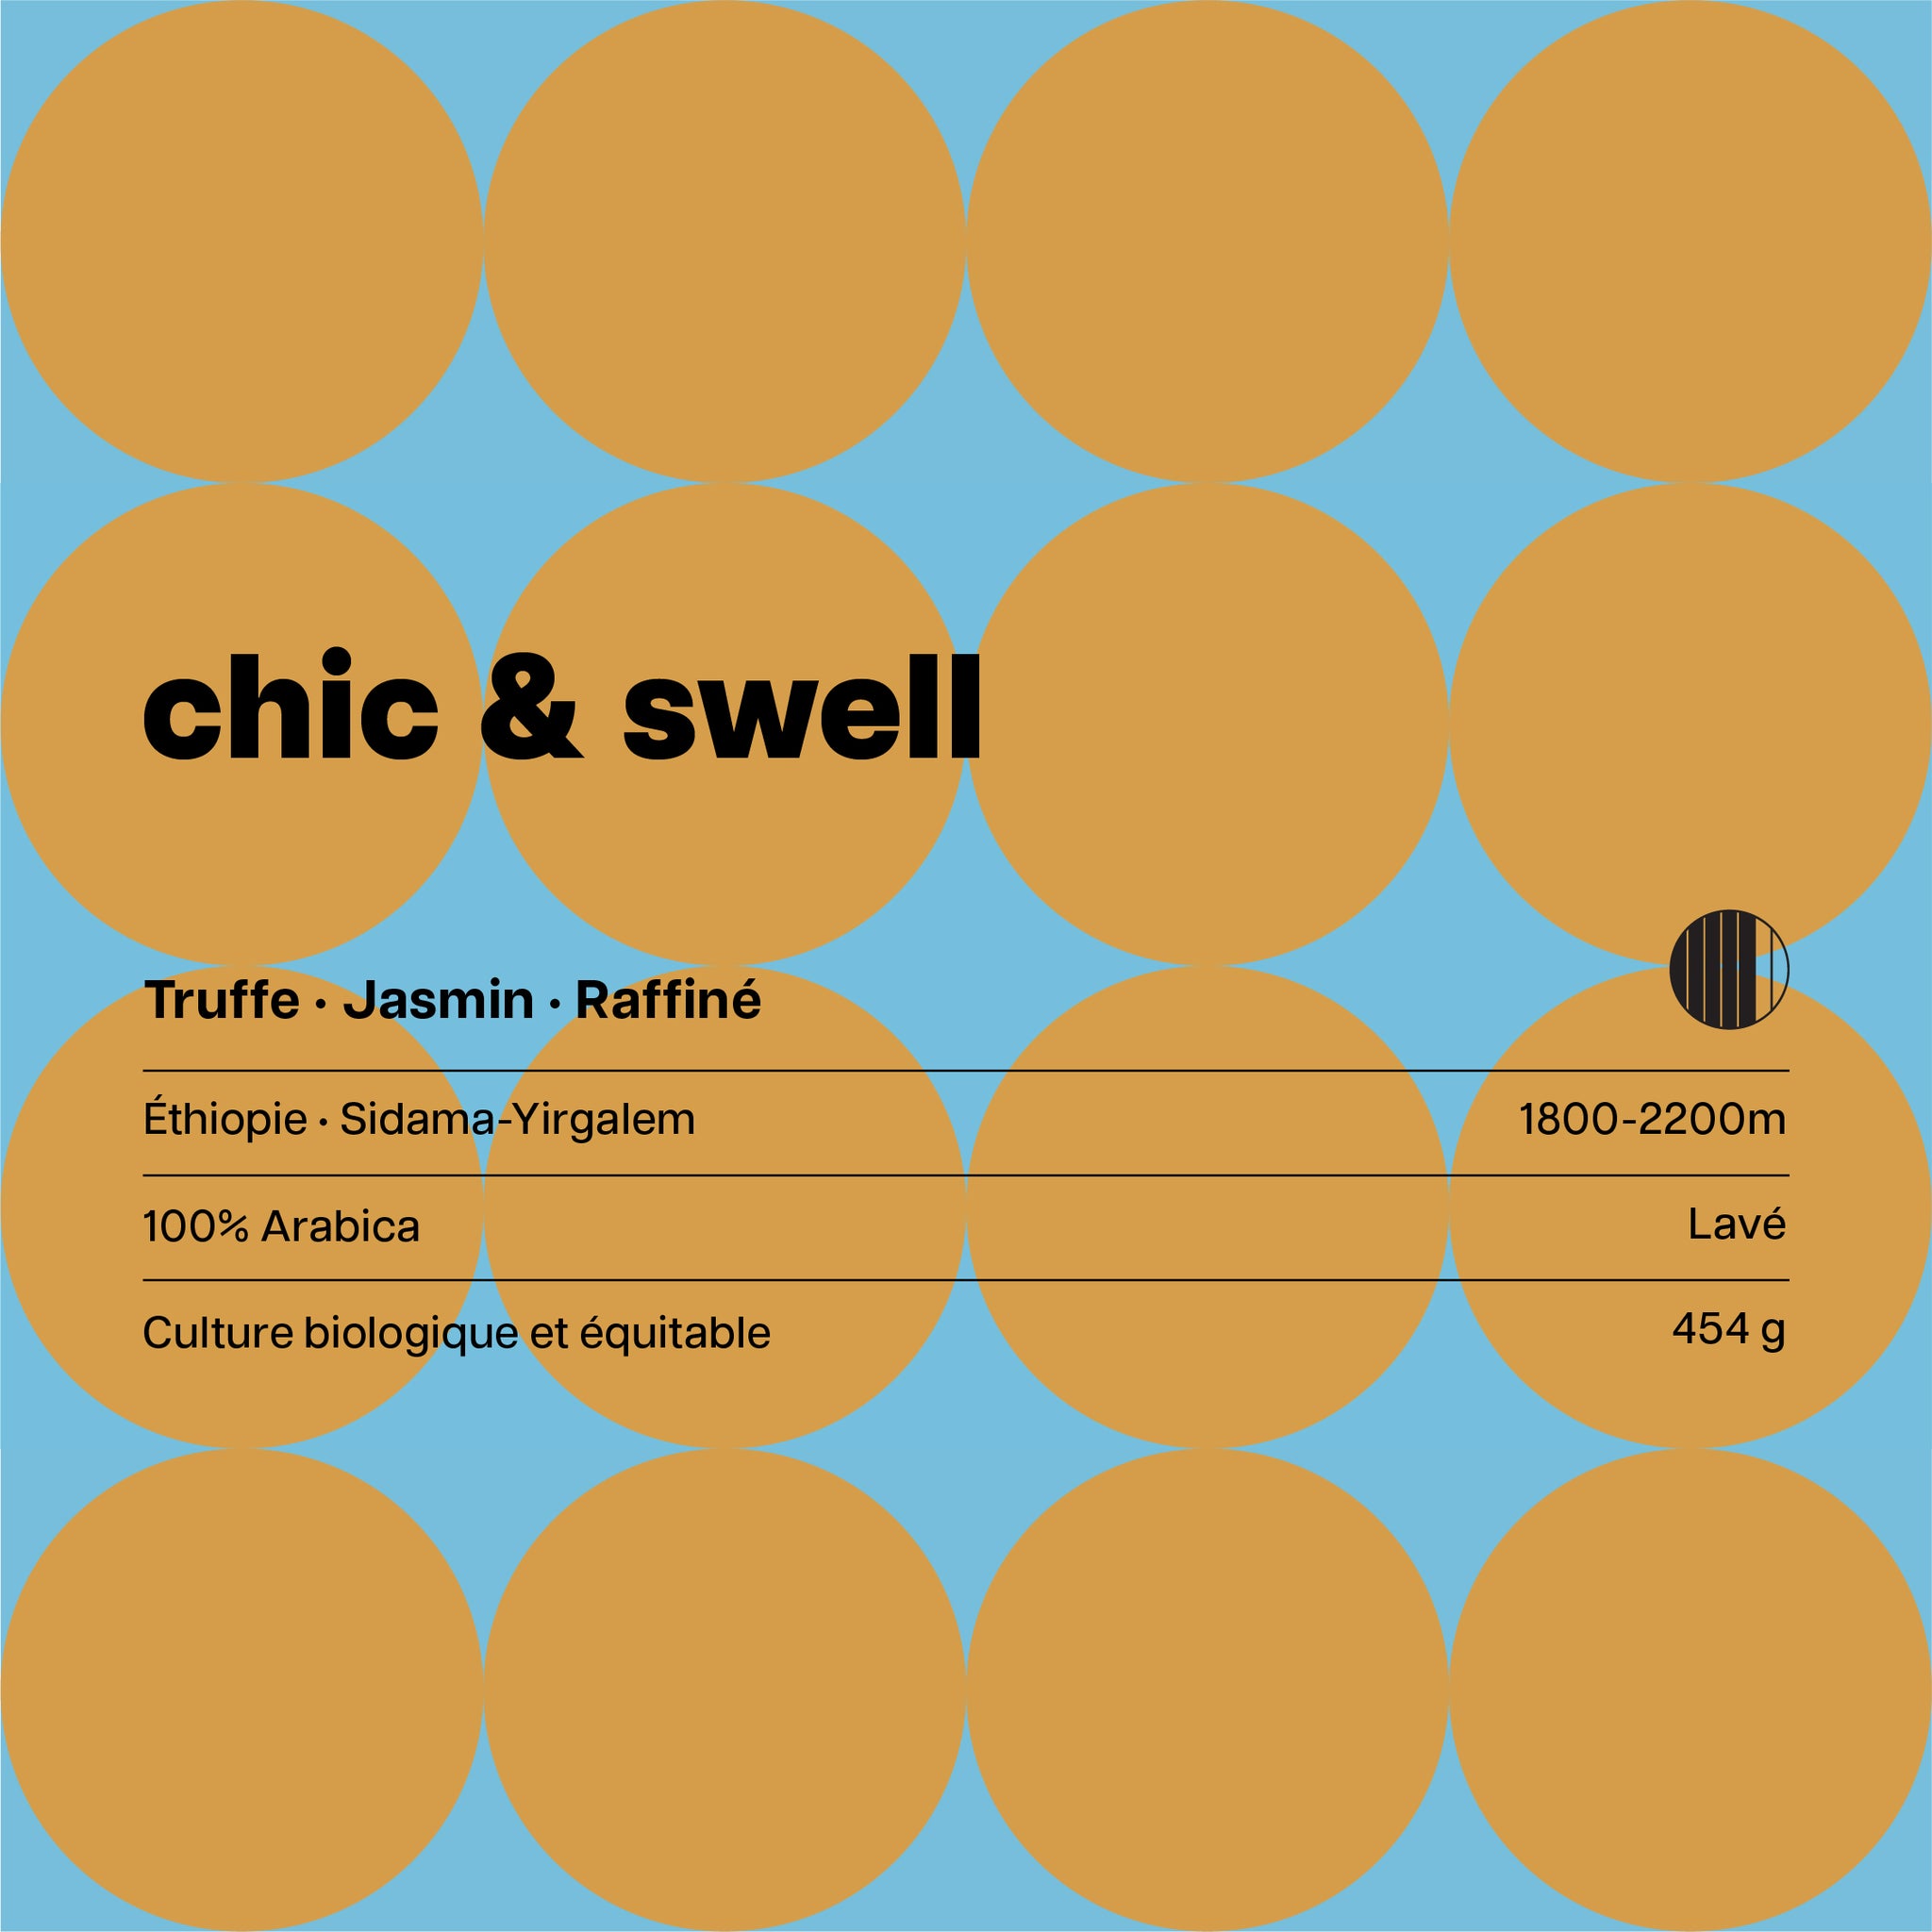 chic & swell